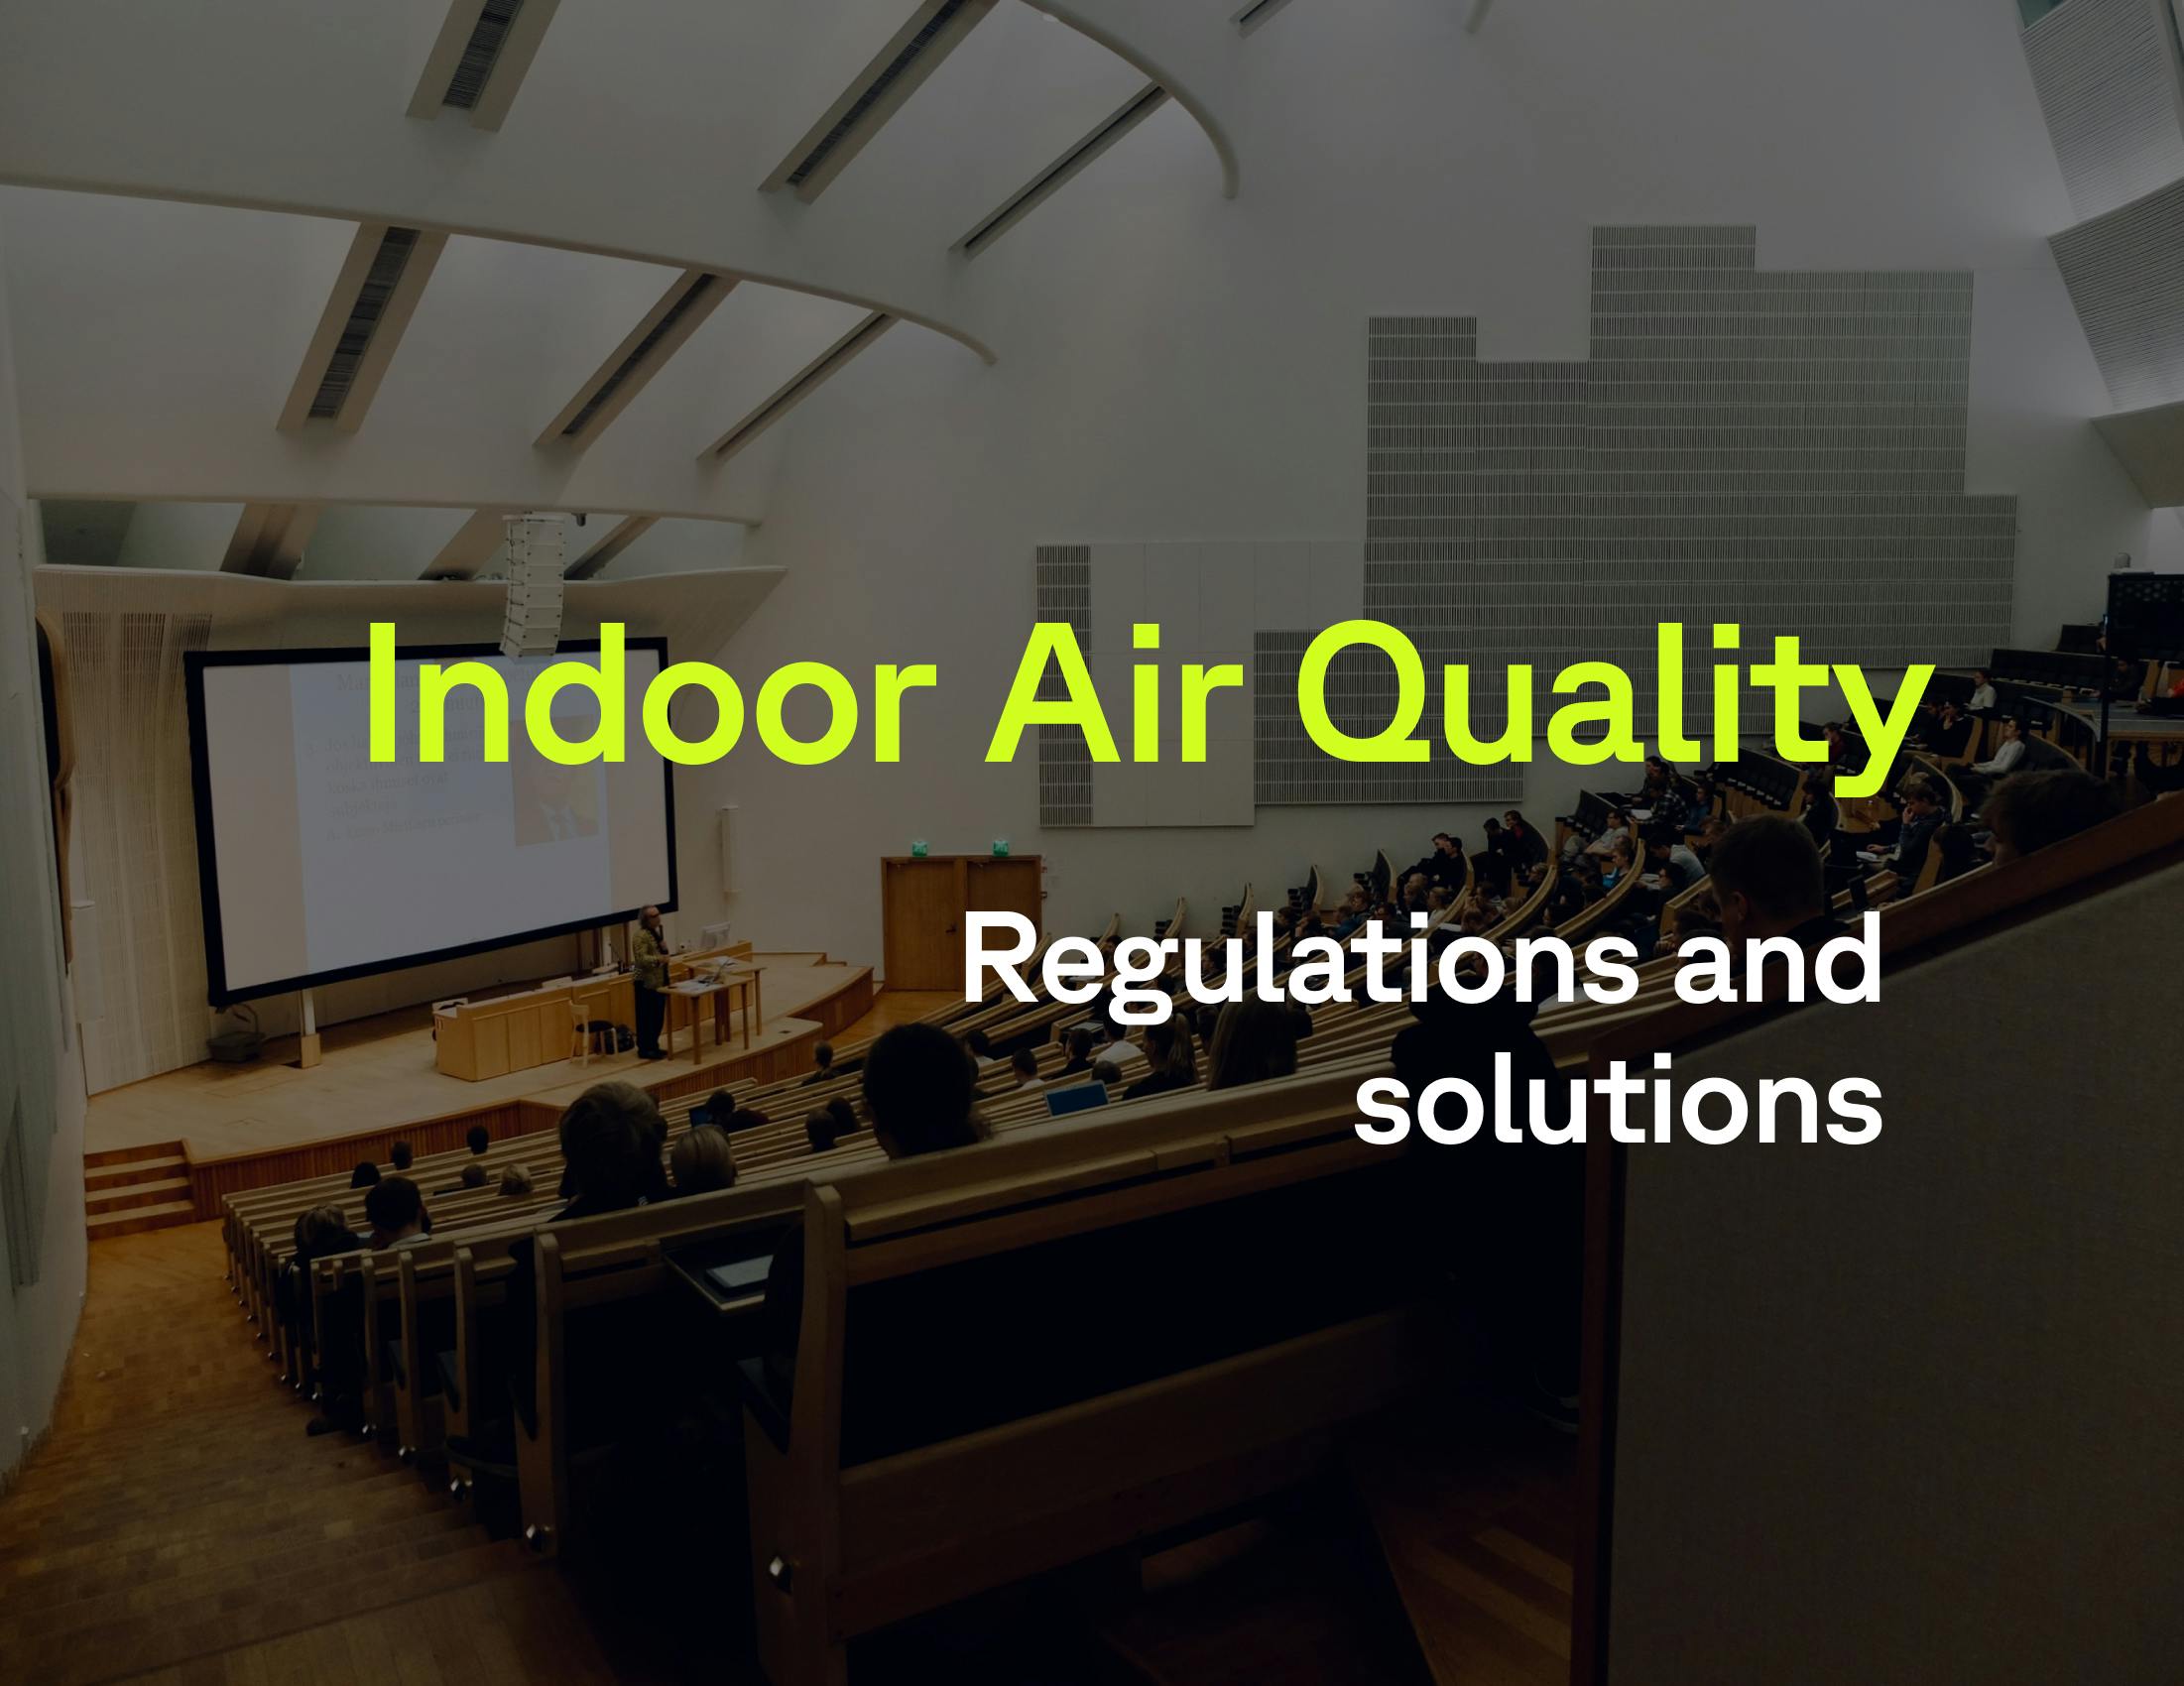 indoor air quality regulations in the UK 